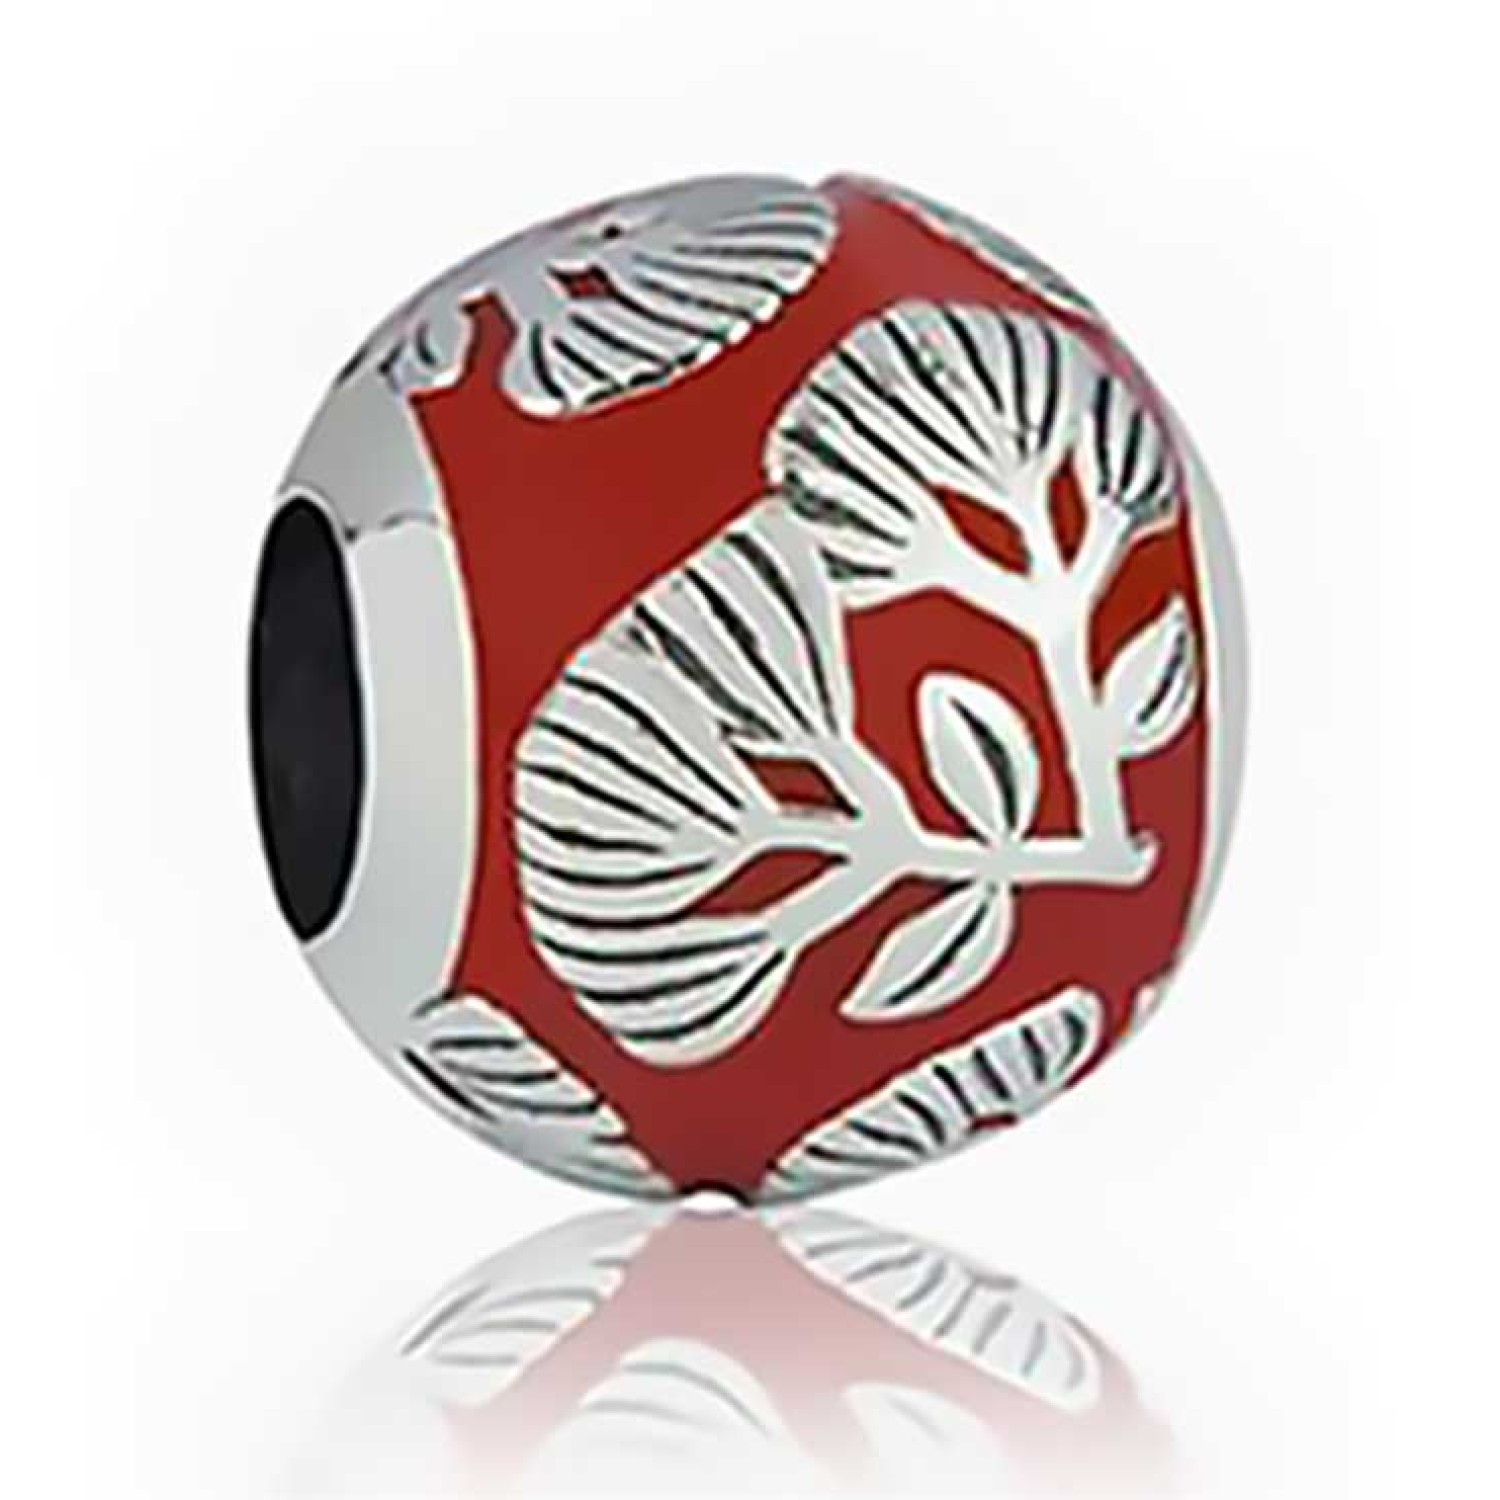 LKE059 Evolve Jewellery Wild Pohutukawa Charm. The curious fantail (piwakawaka) is one of New Zealands most cherished native birds, respected as a symbolic messenger. These friendly little characters are known for their unique fan-shaped tail and playful 